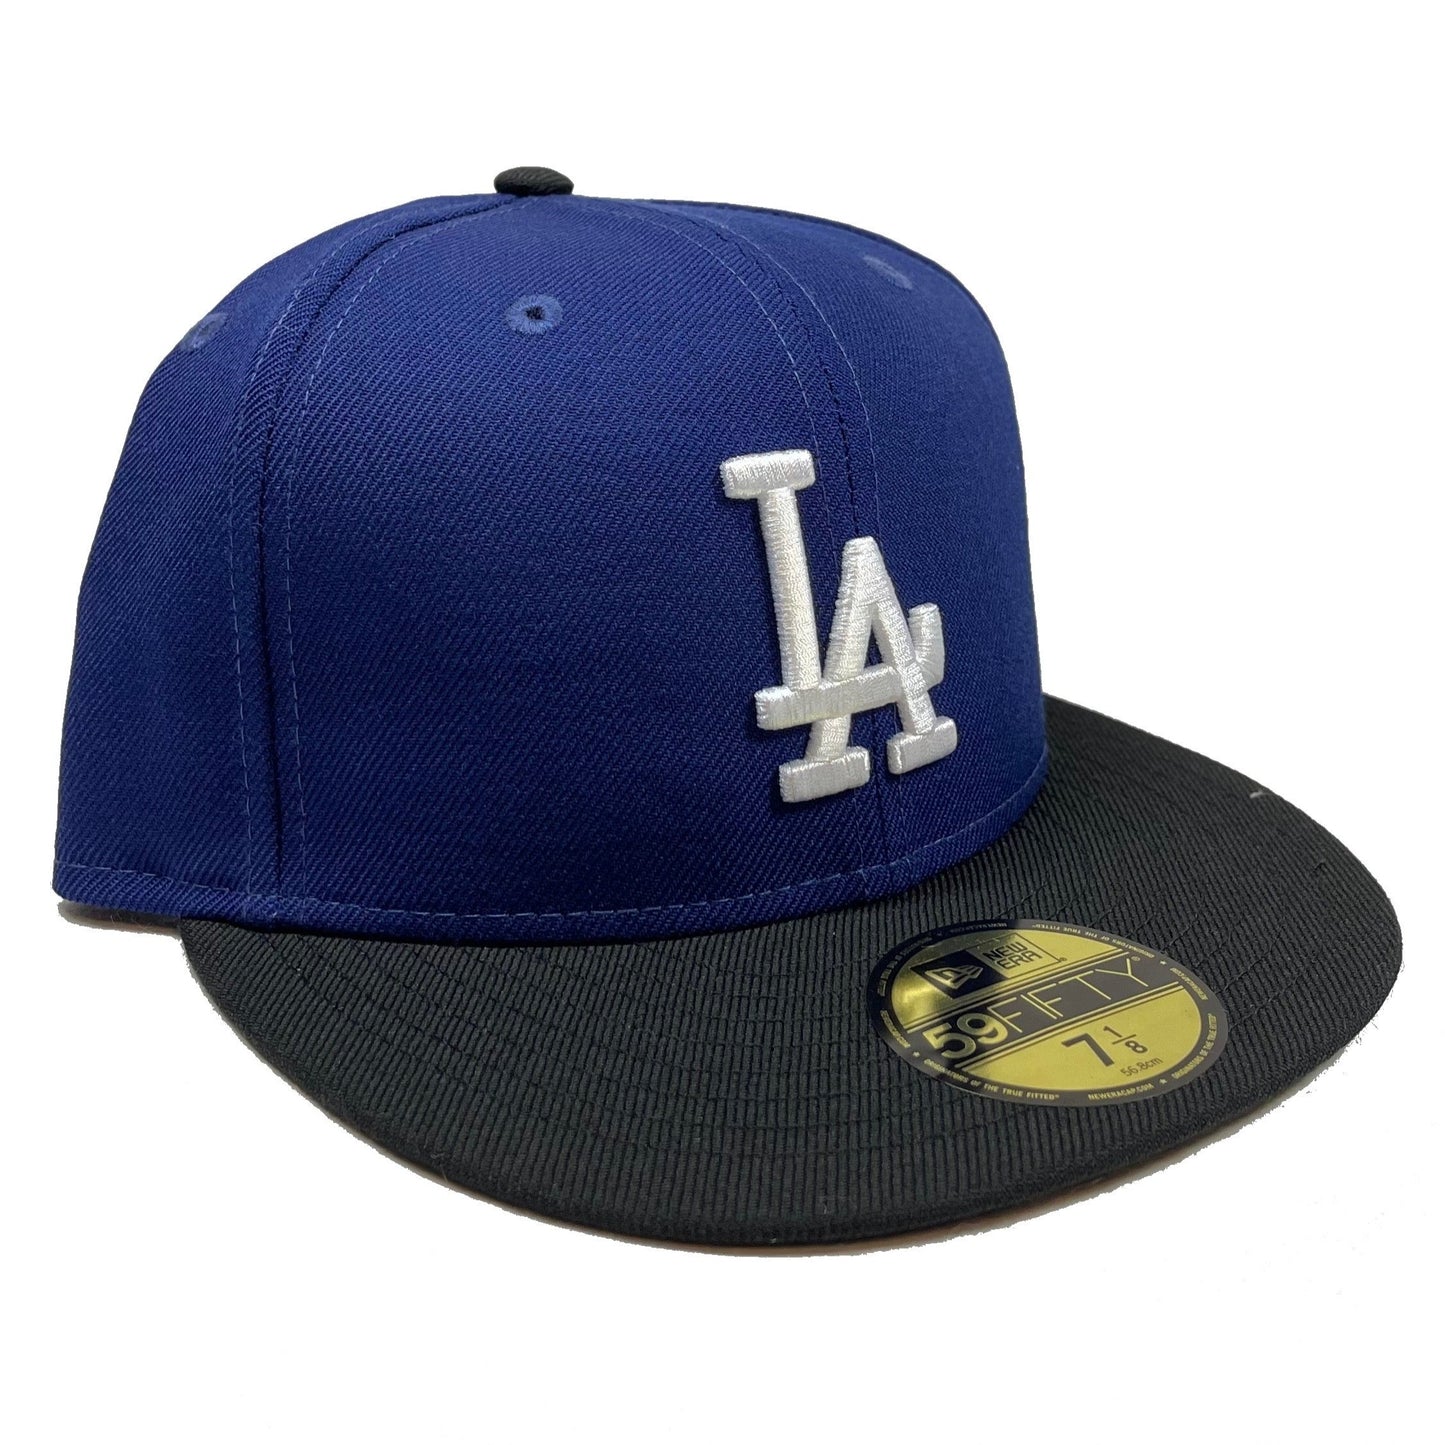 Los Angeles Dodgers (Blue/Black) Snapback/Fitted